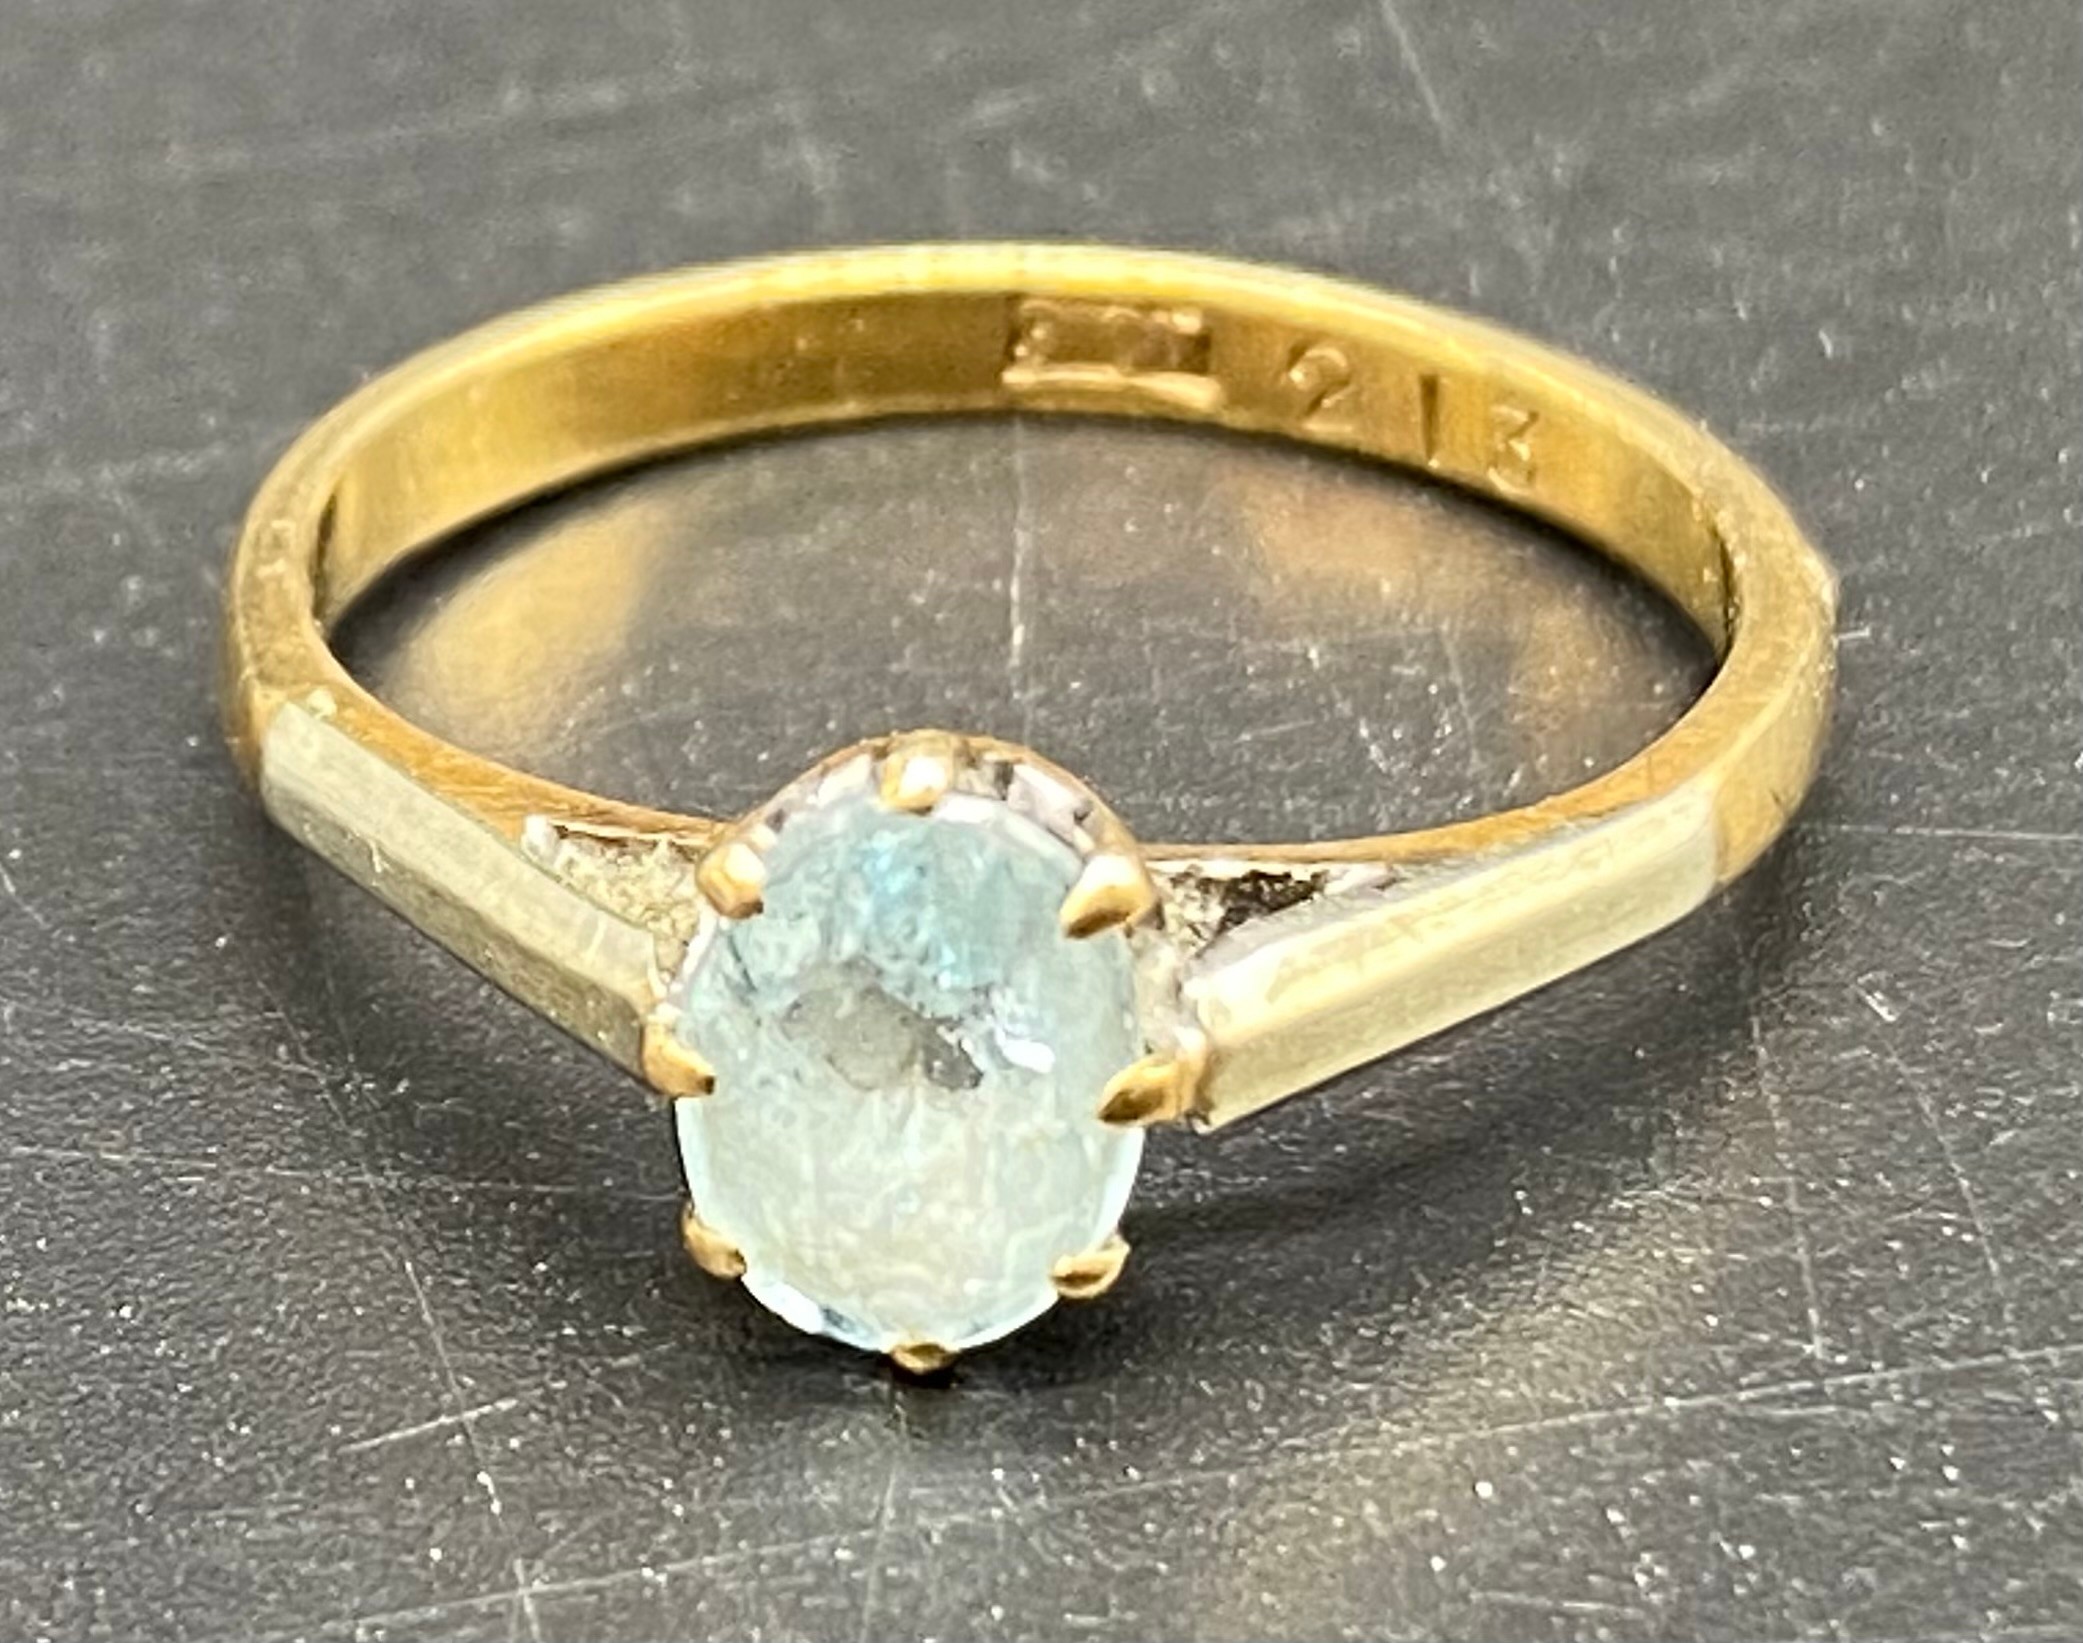 9ct gold hallmarked blue stone ring [Size L 1/2] [1.76] grams - Image 2 of 3